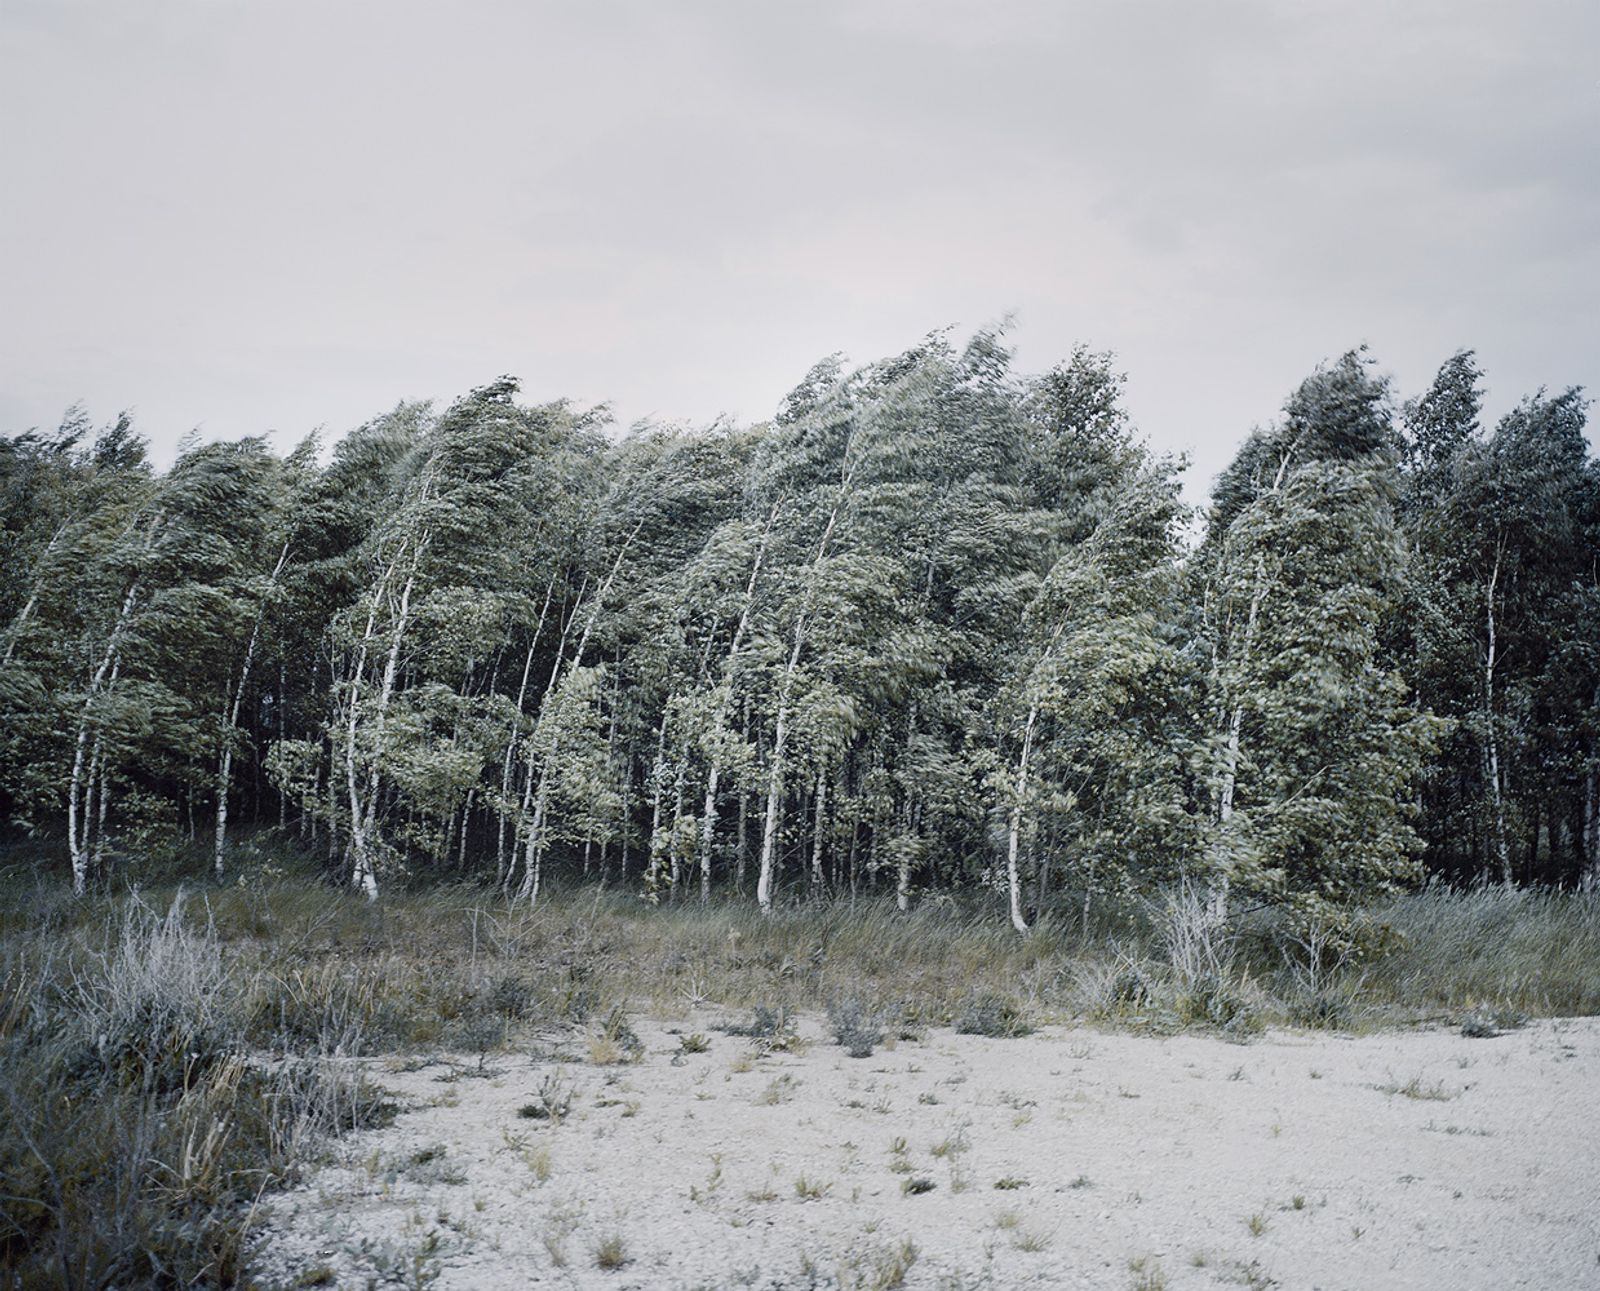 © Jasper  Bastian - Image from the A Road Not Taken photography project